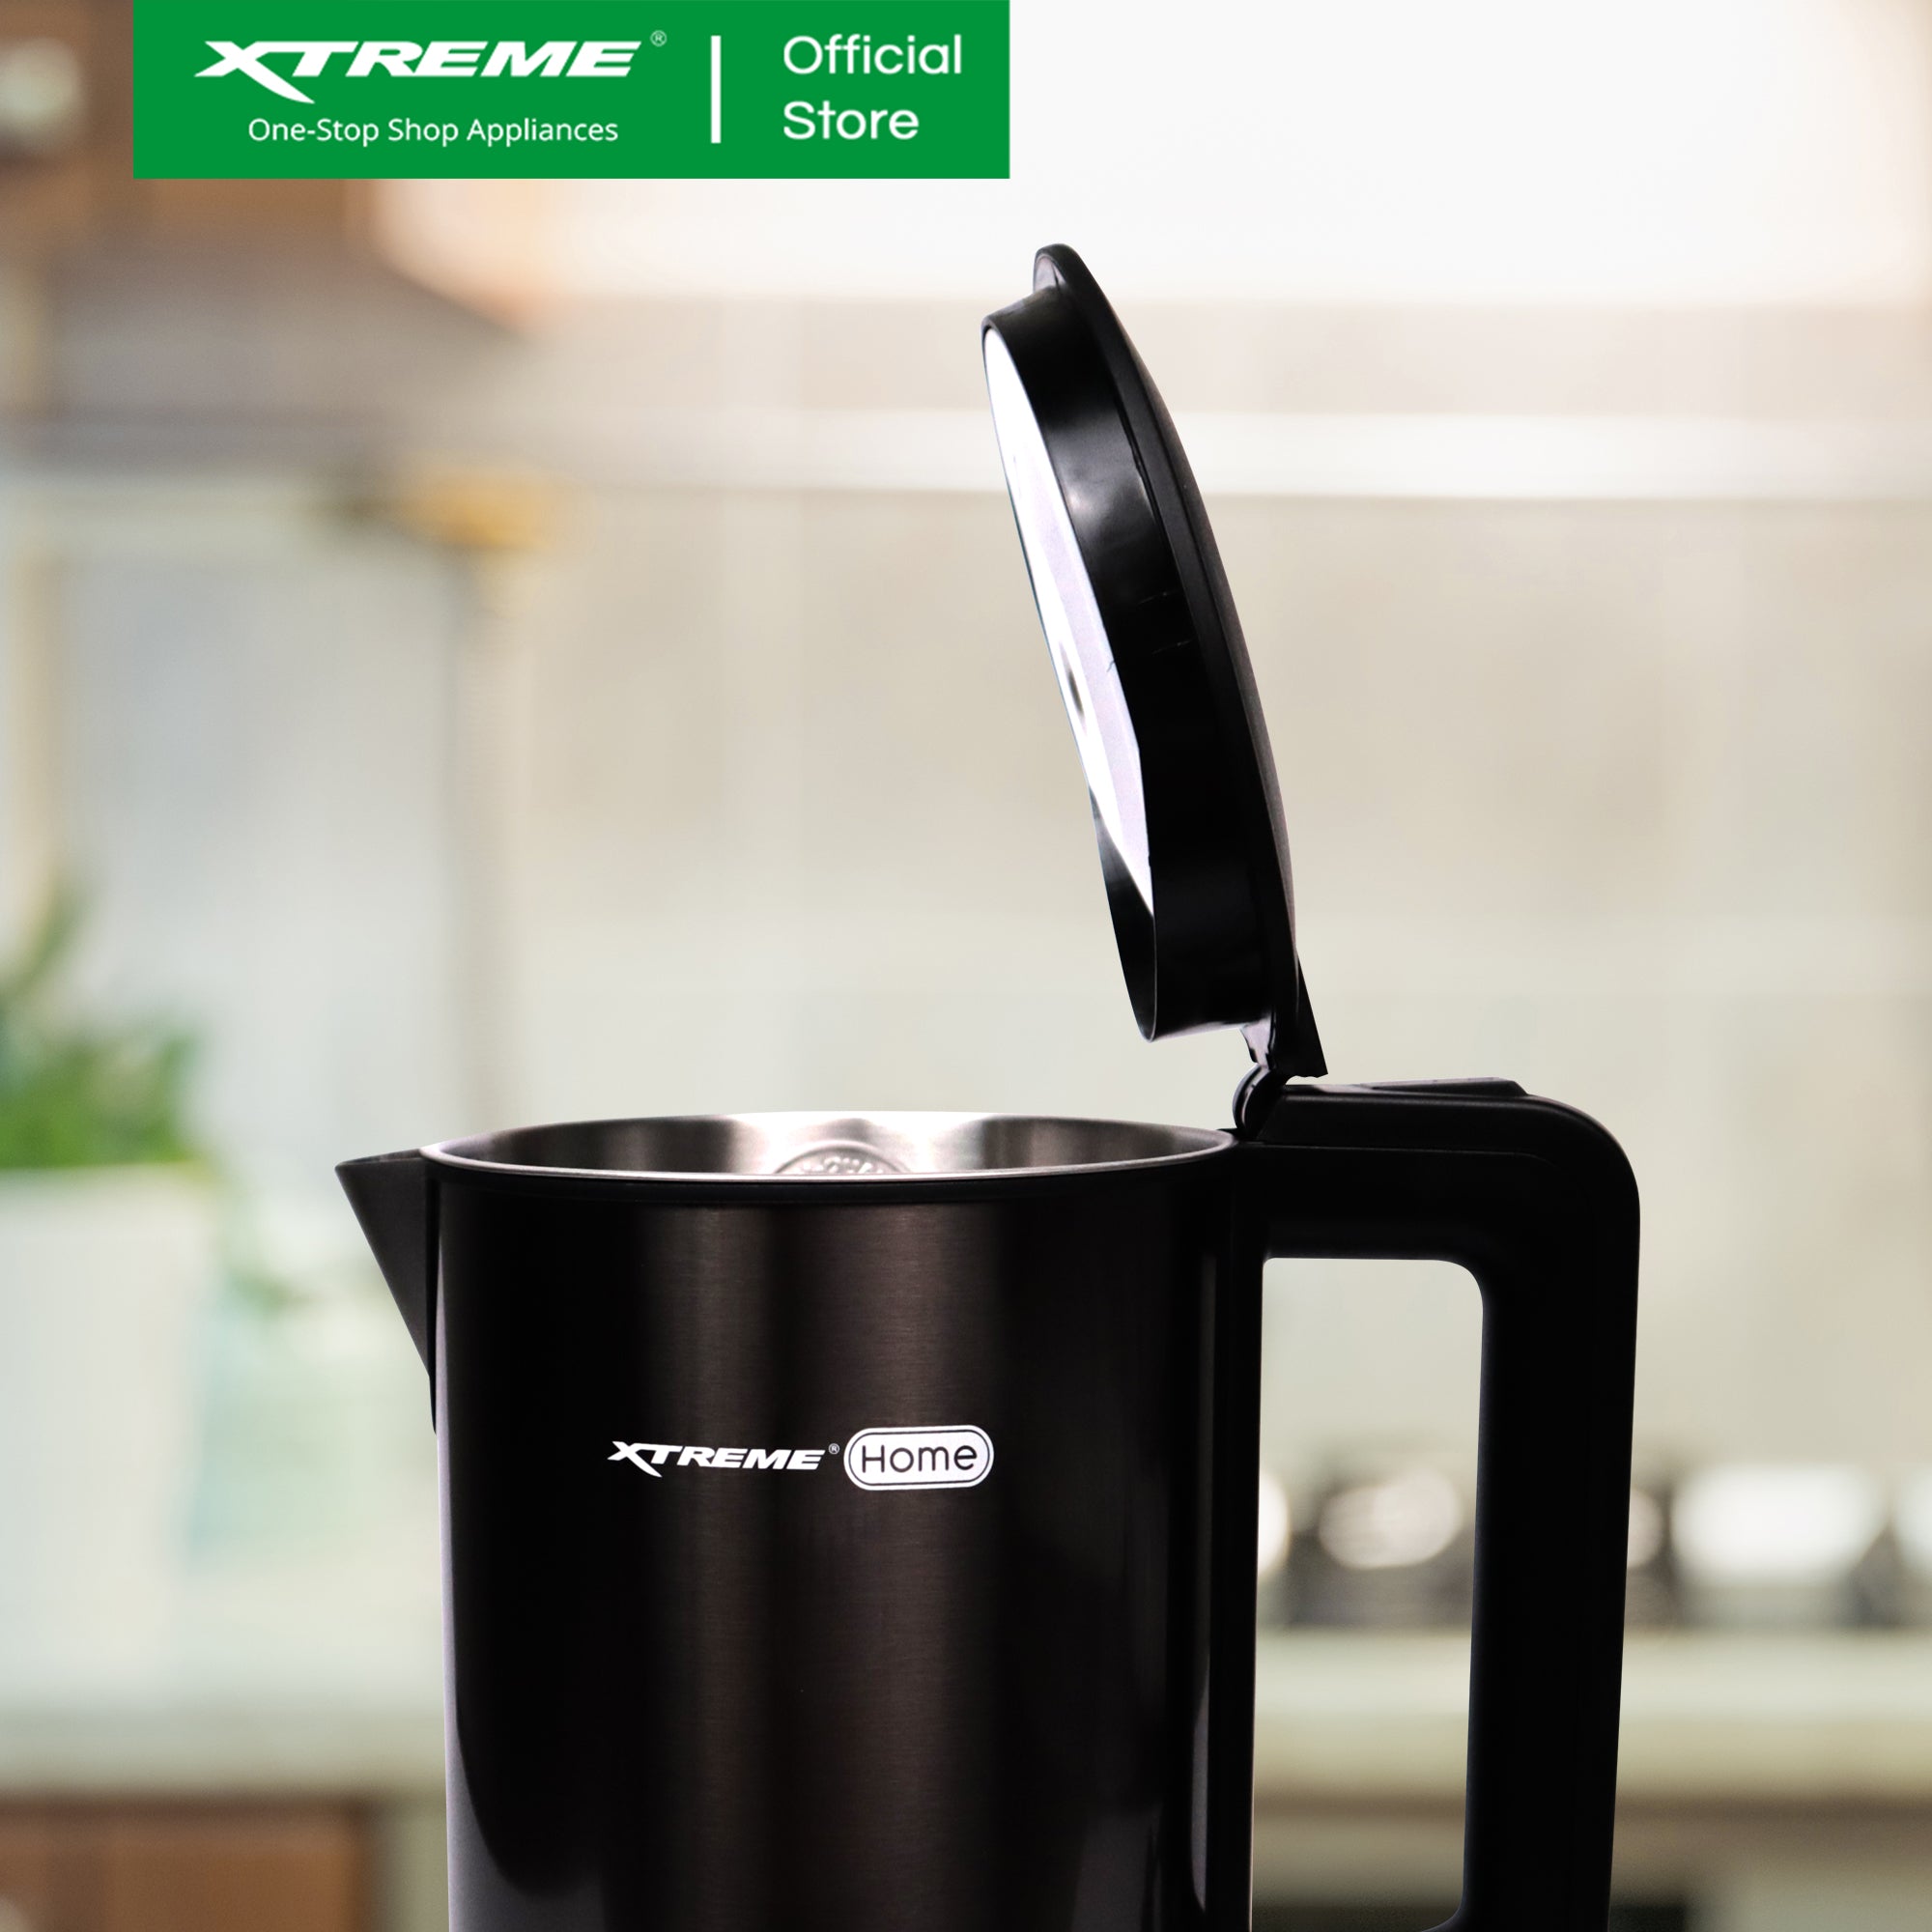 X-SERIES 1.7L Stainless Steel Electric Kettle with Automatic Power-off (Black) | XH-KT-SS17BLACKX